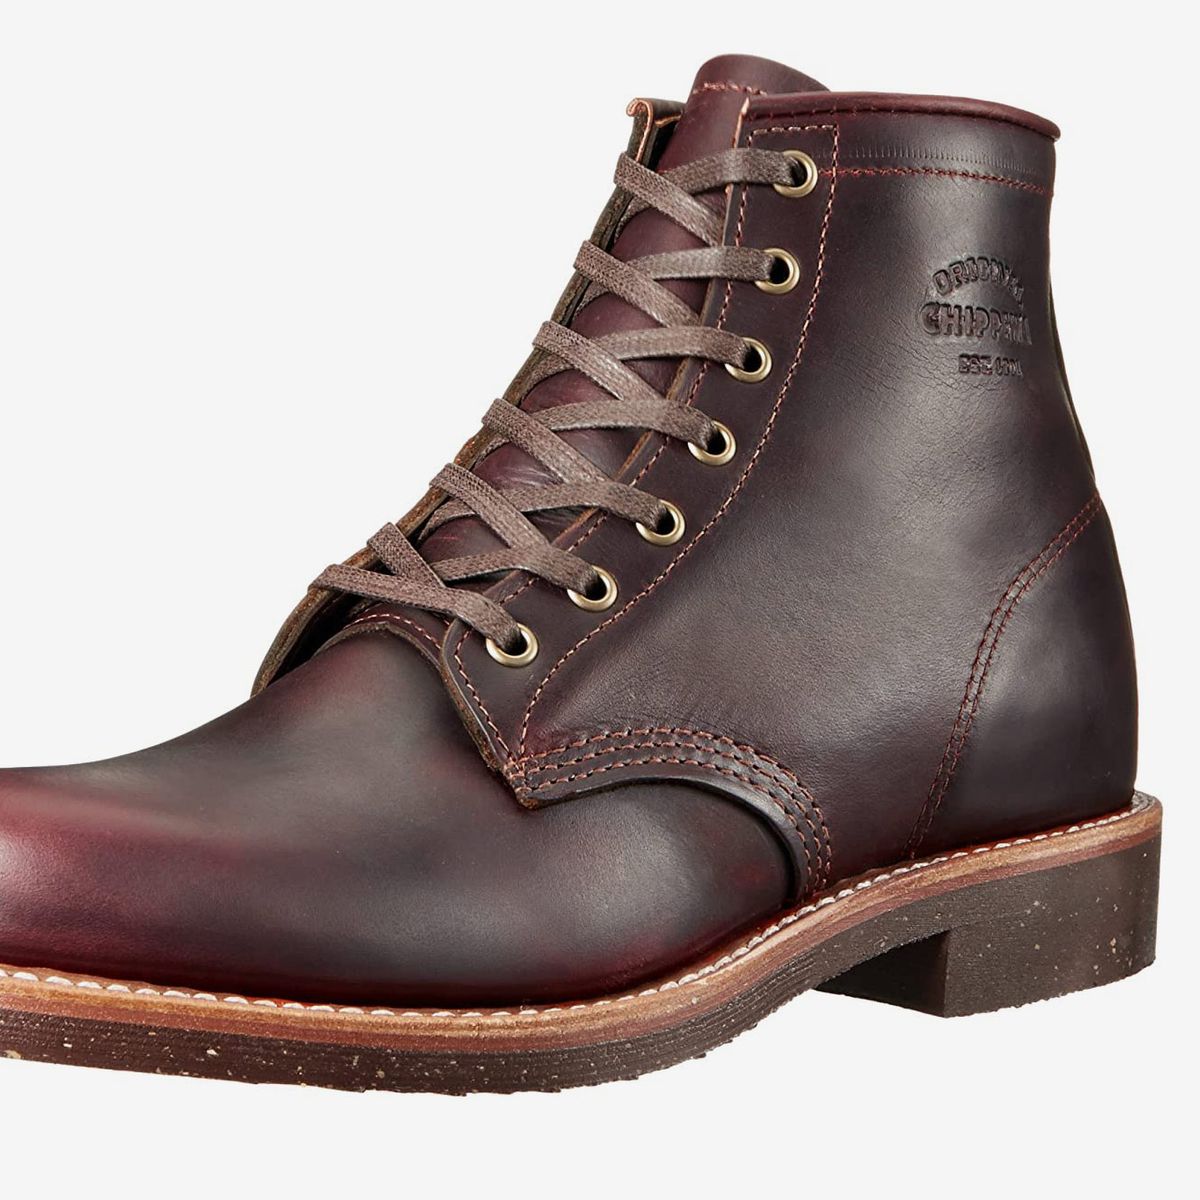 comfortable work boots for standing all day